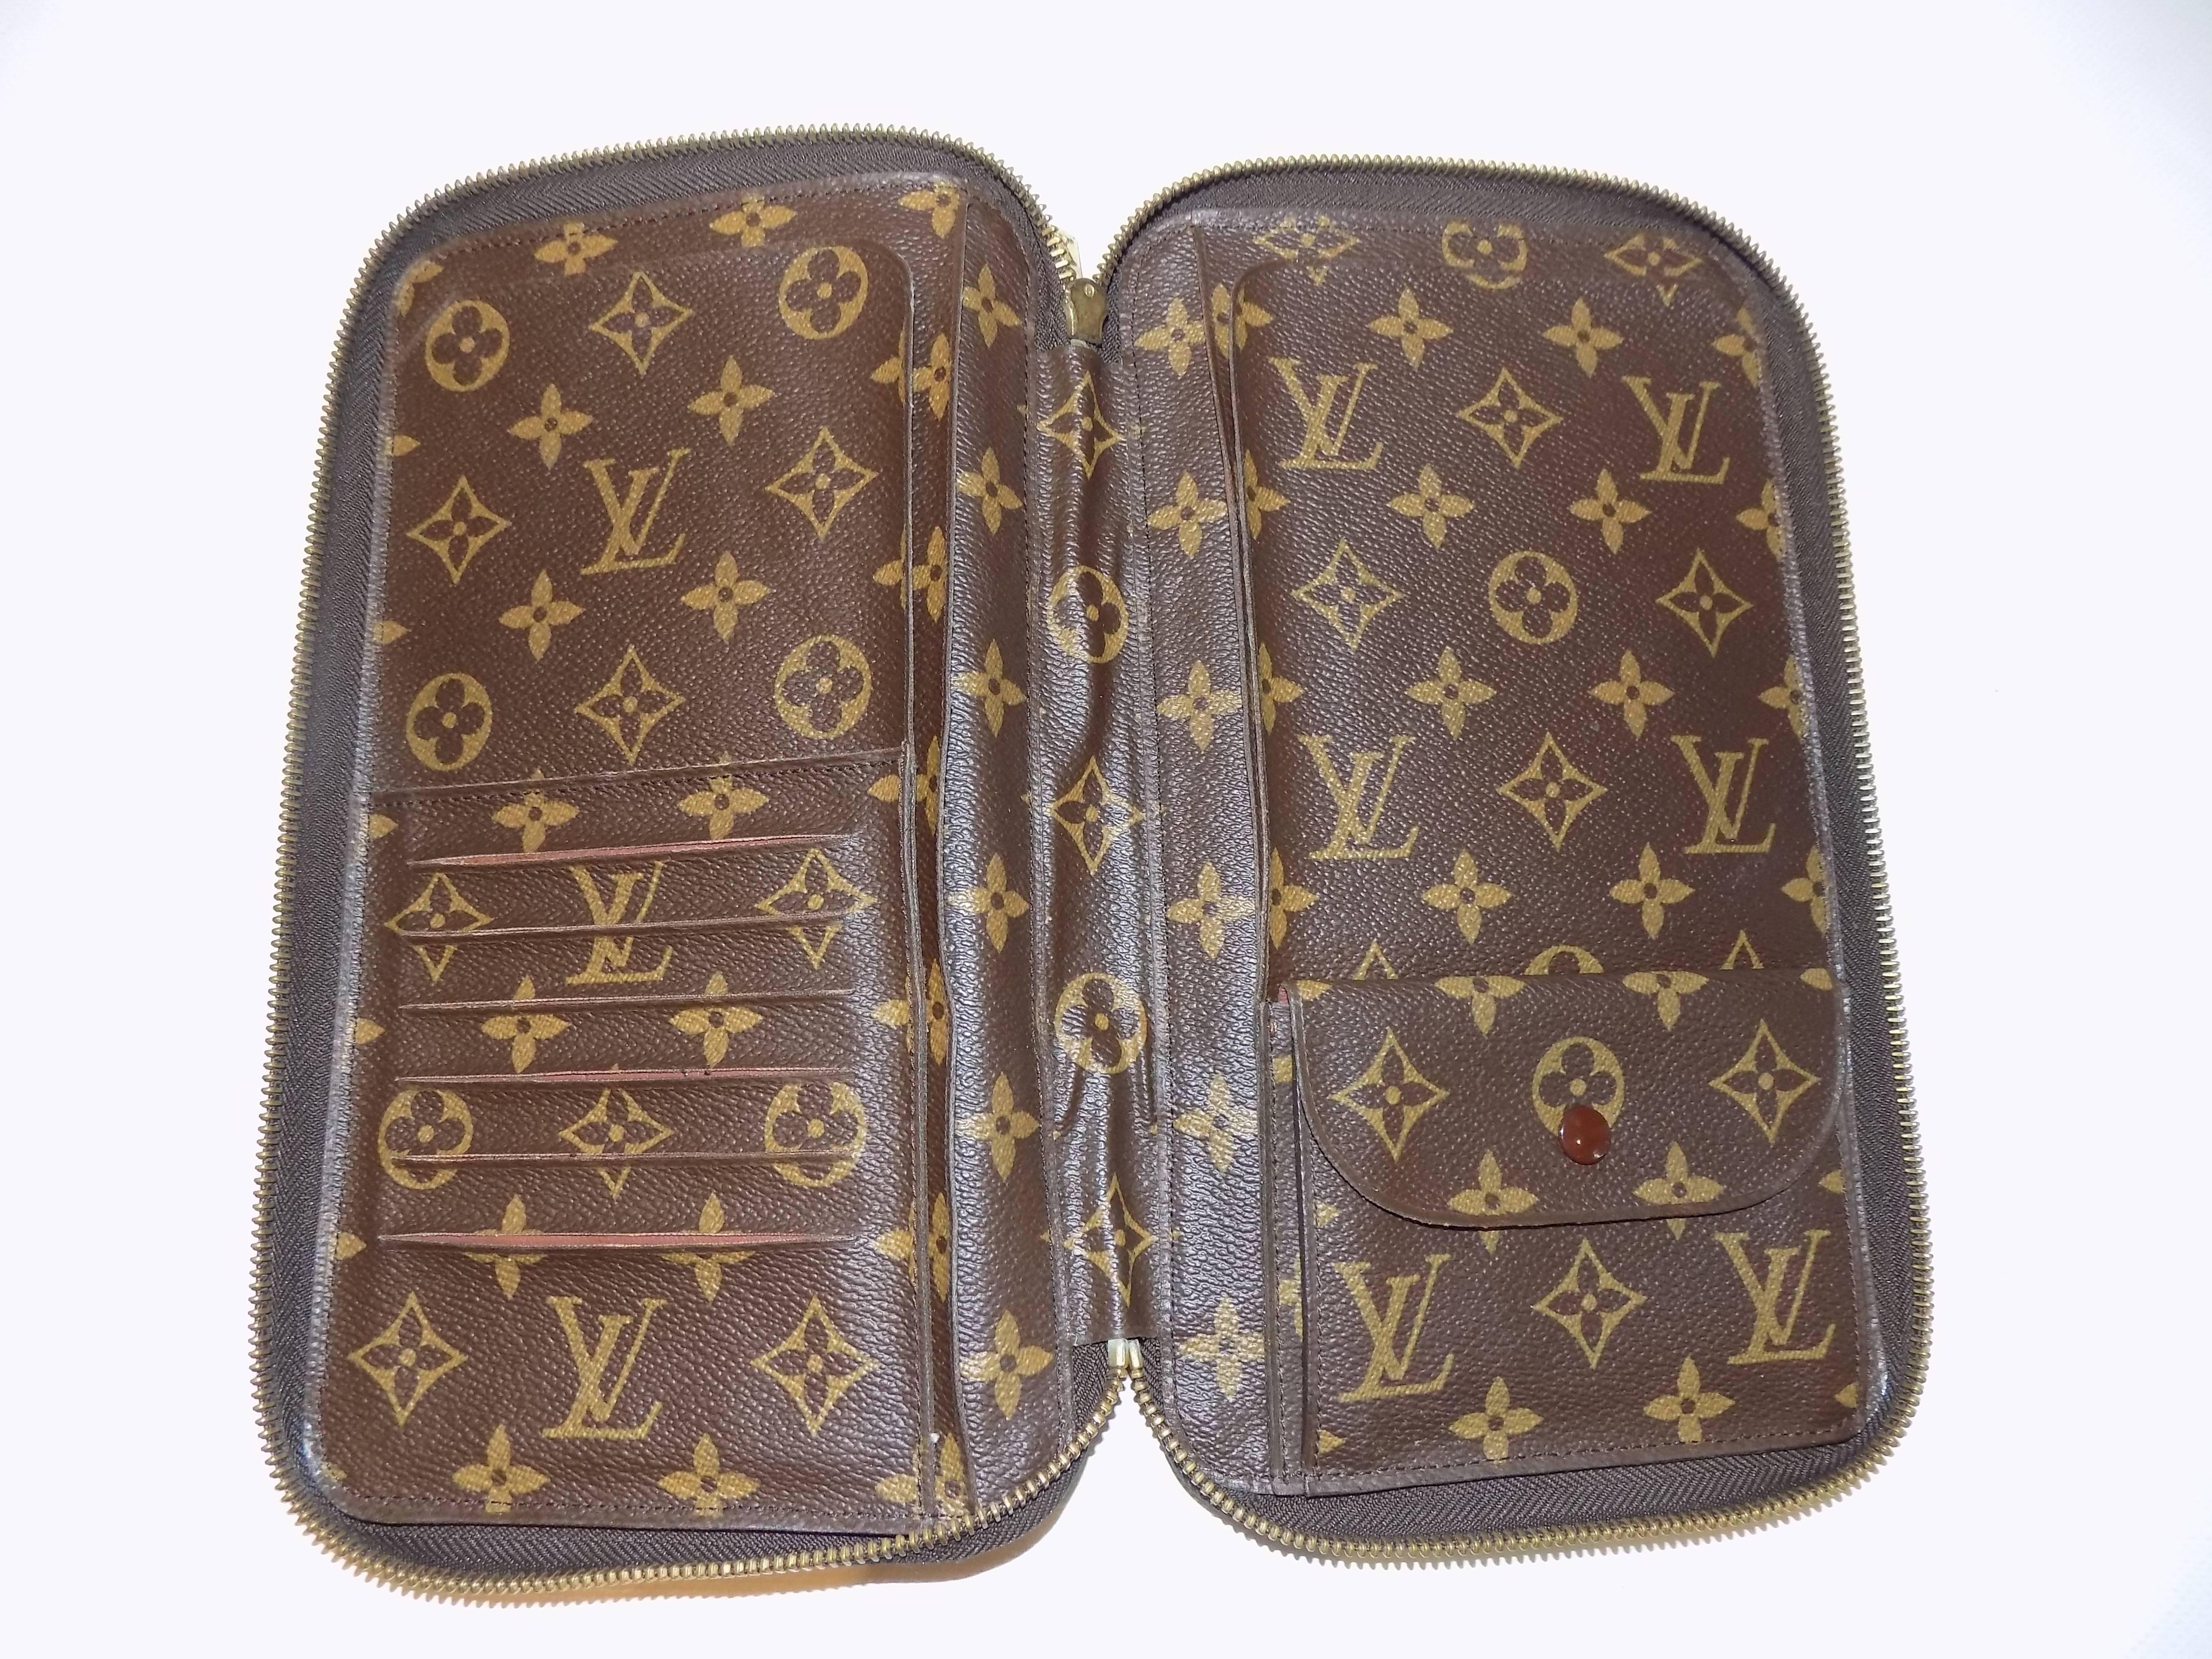 Rare LOUIS VUITTON Zip Passport Agenda Cover Portfolio Organizer de Voyage.

Stamp, made in France, 100% authentic, excellent condition. 6 card slots, 4 pockets (passport space) change pocket. Zipper closure with LV pull on handle
10